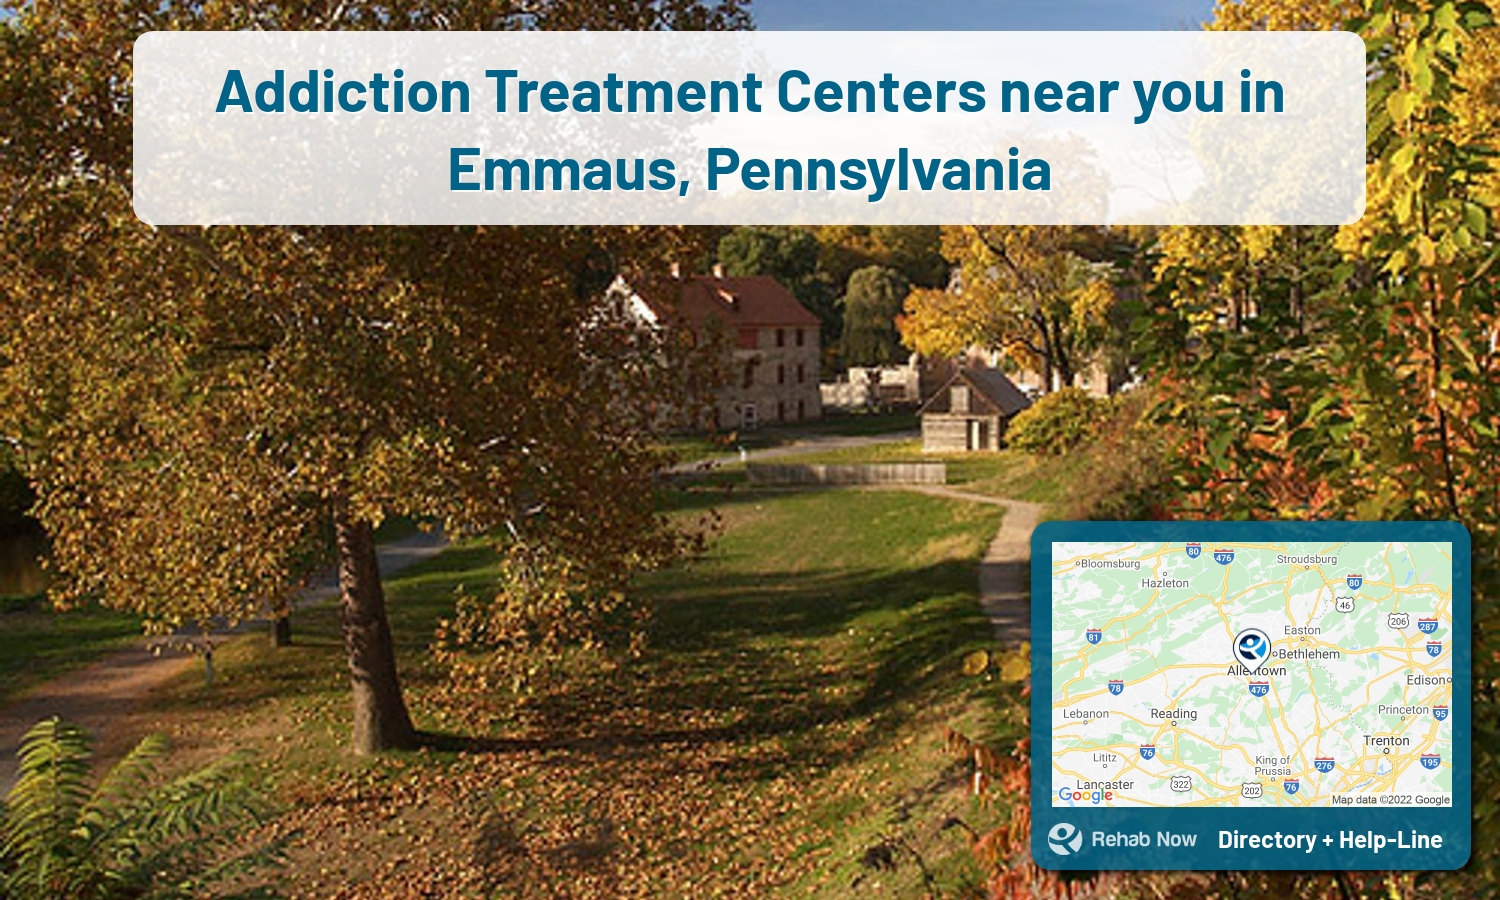 Those struggling with addiction can find help through addiction rehab facilities in Emmaus, PA. Get help now!